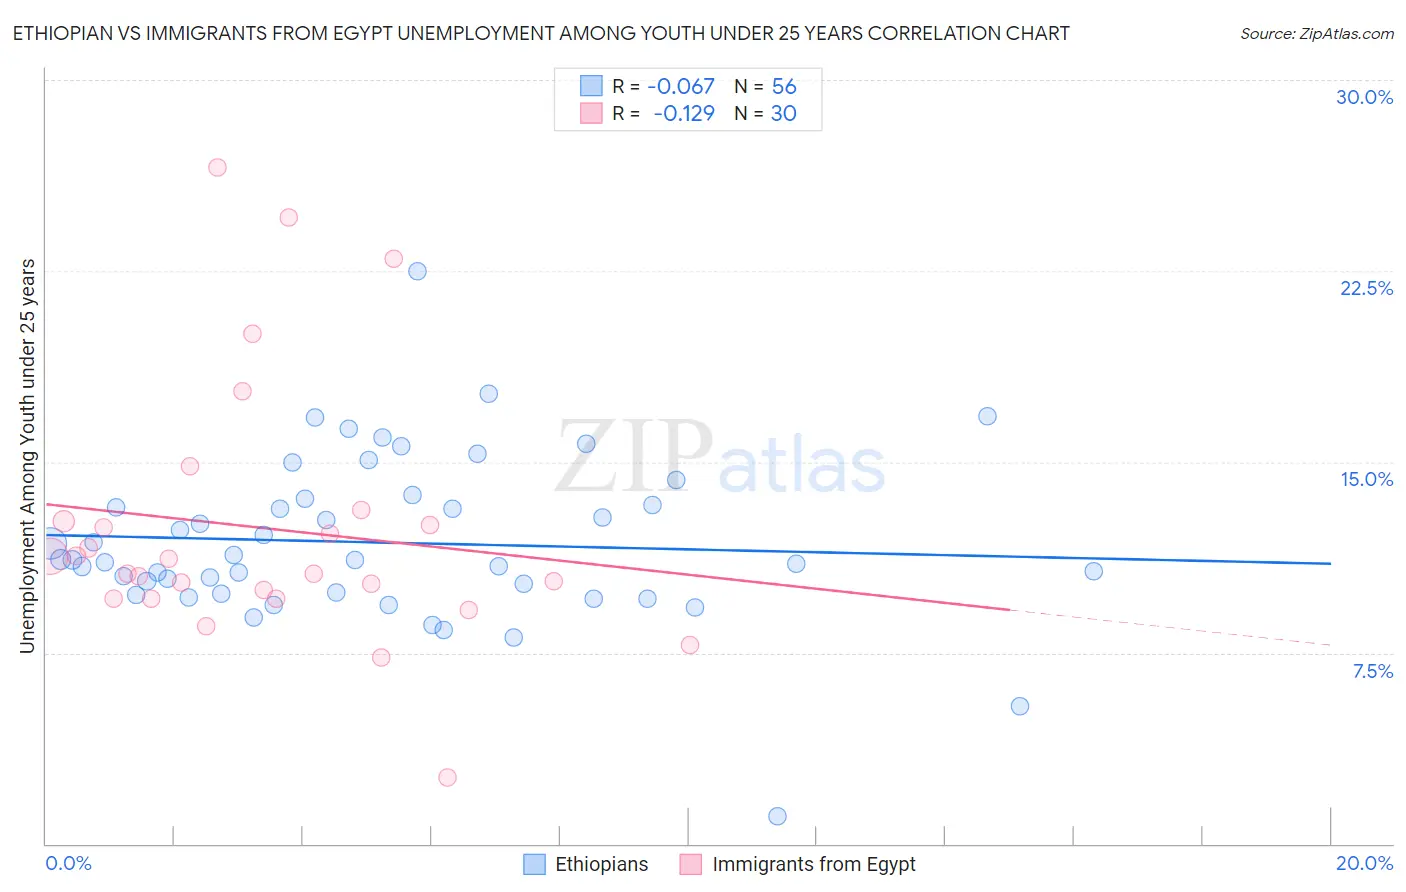 Ethiopian vs Immigrants from Egypt Unemployment Among Youth under 25 years